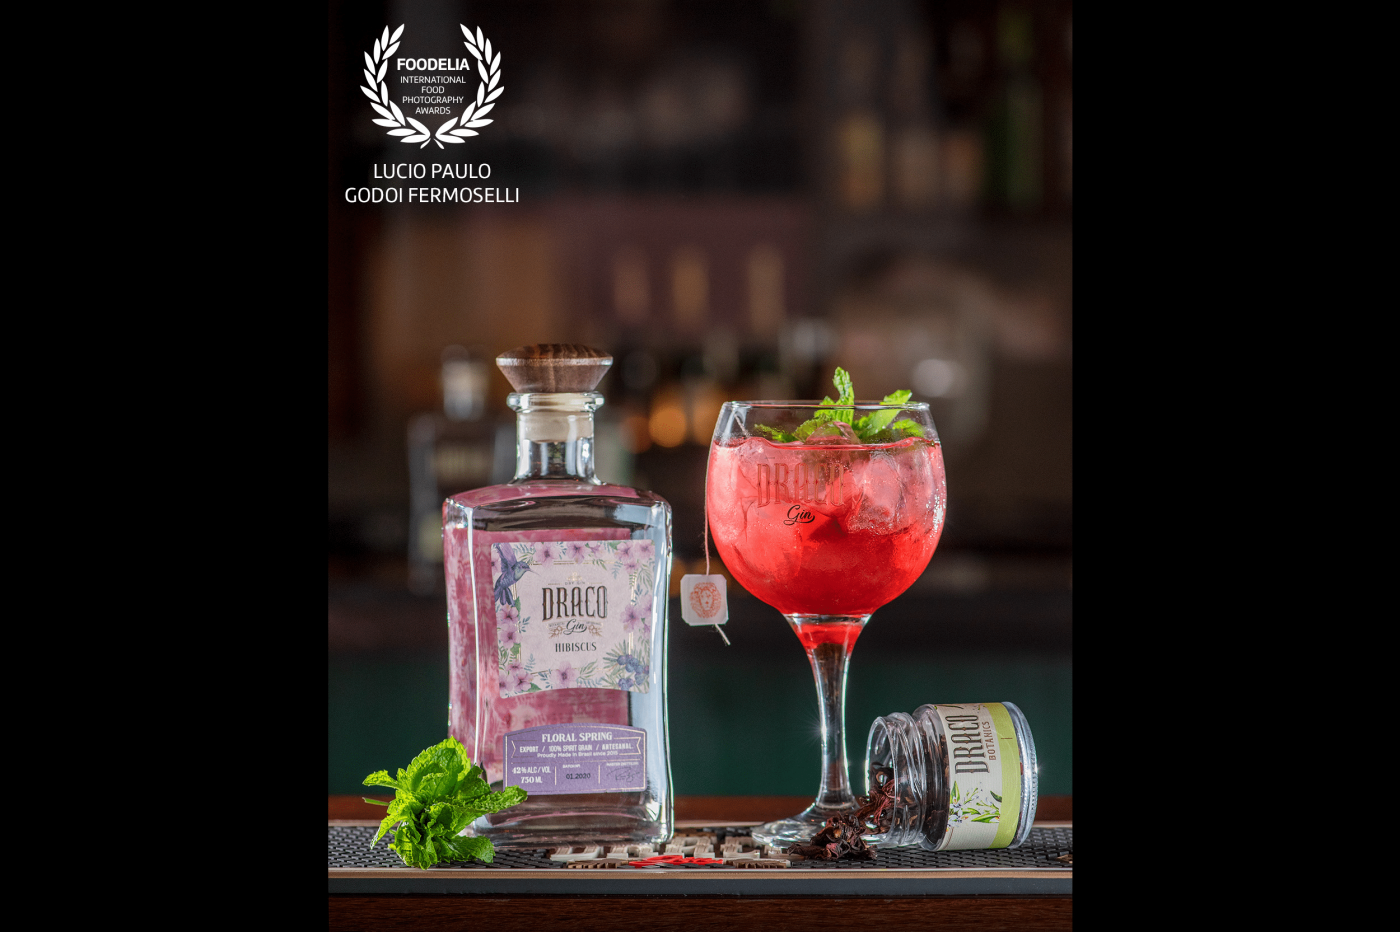 Photograph produced to promote @dracogin in @sala575<br />
************************************************************<br />
Used equipment:<br />
Nikon D750